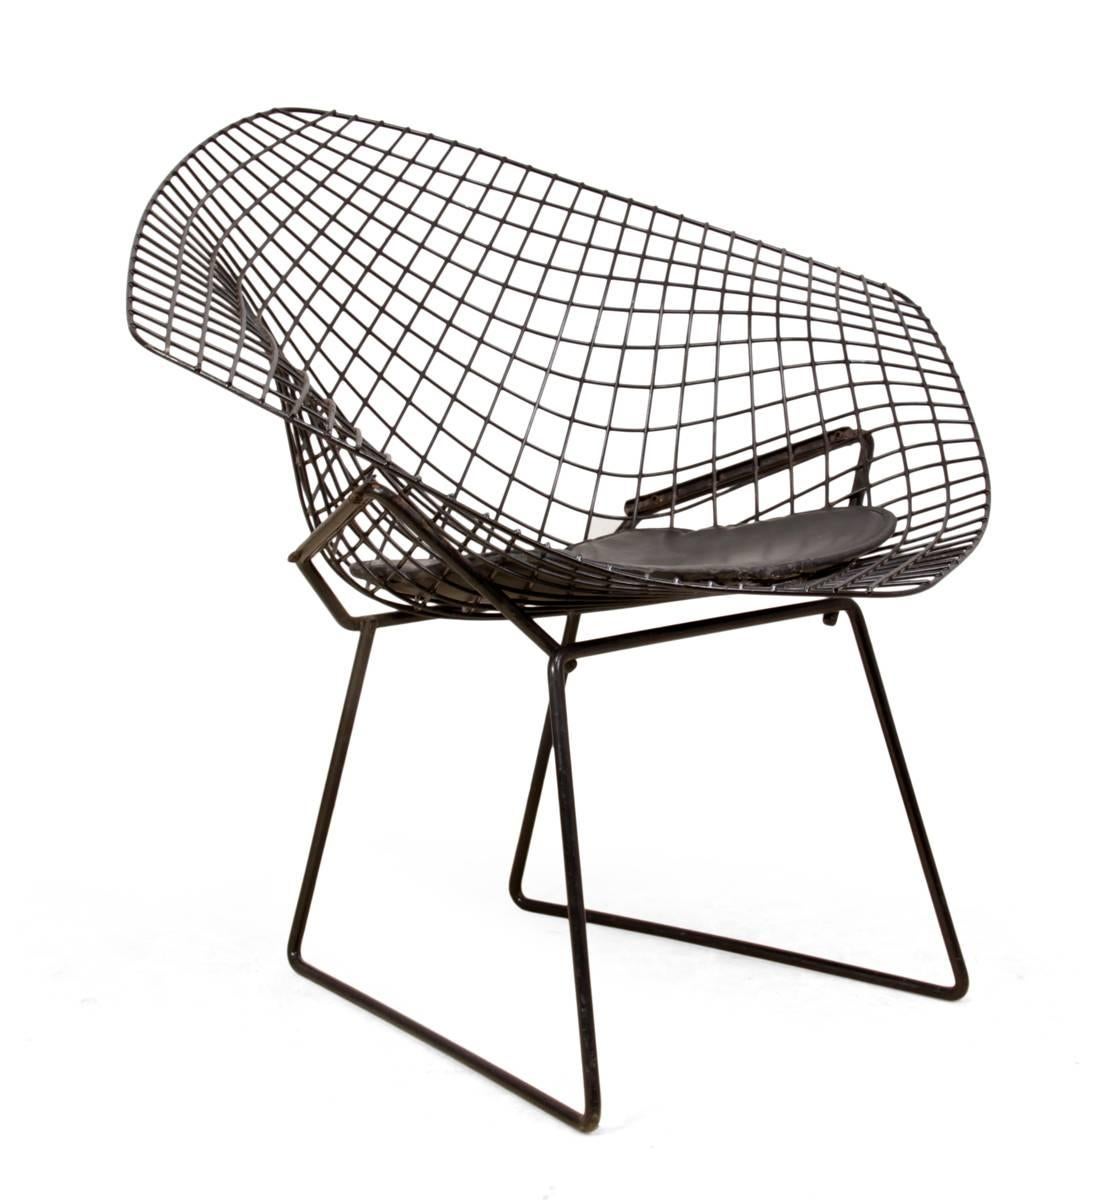 Harry Bertoia diamond chair, circa 1965
A black coated wire diamond chair designed by Harry Bertoia in 1952 this is a mid-1960s example with original vinyl seat cushion
Age: 1965
Style: Mid-Century Modern
Material: Black coated wire
Condition: